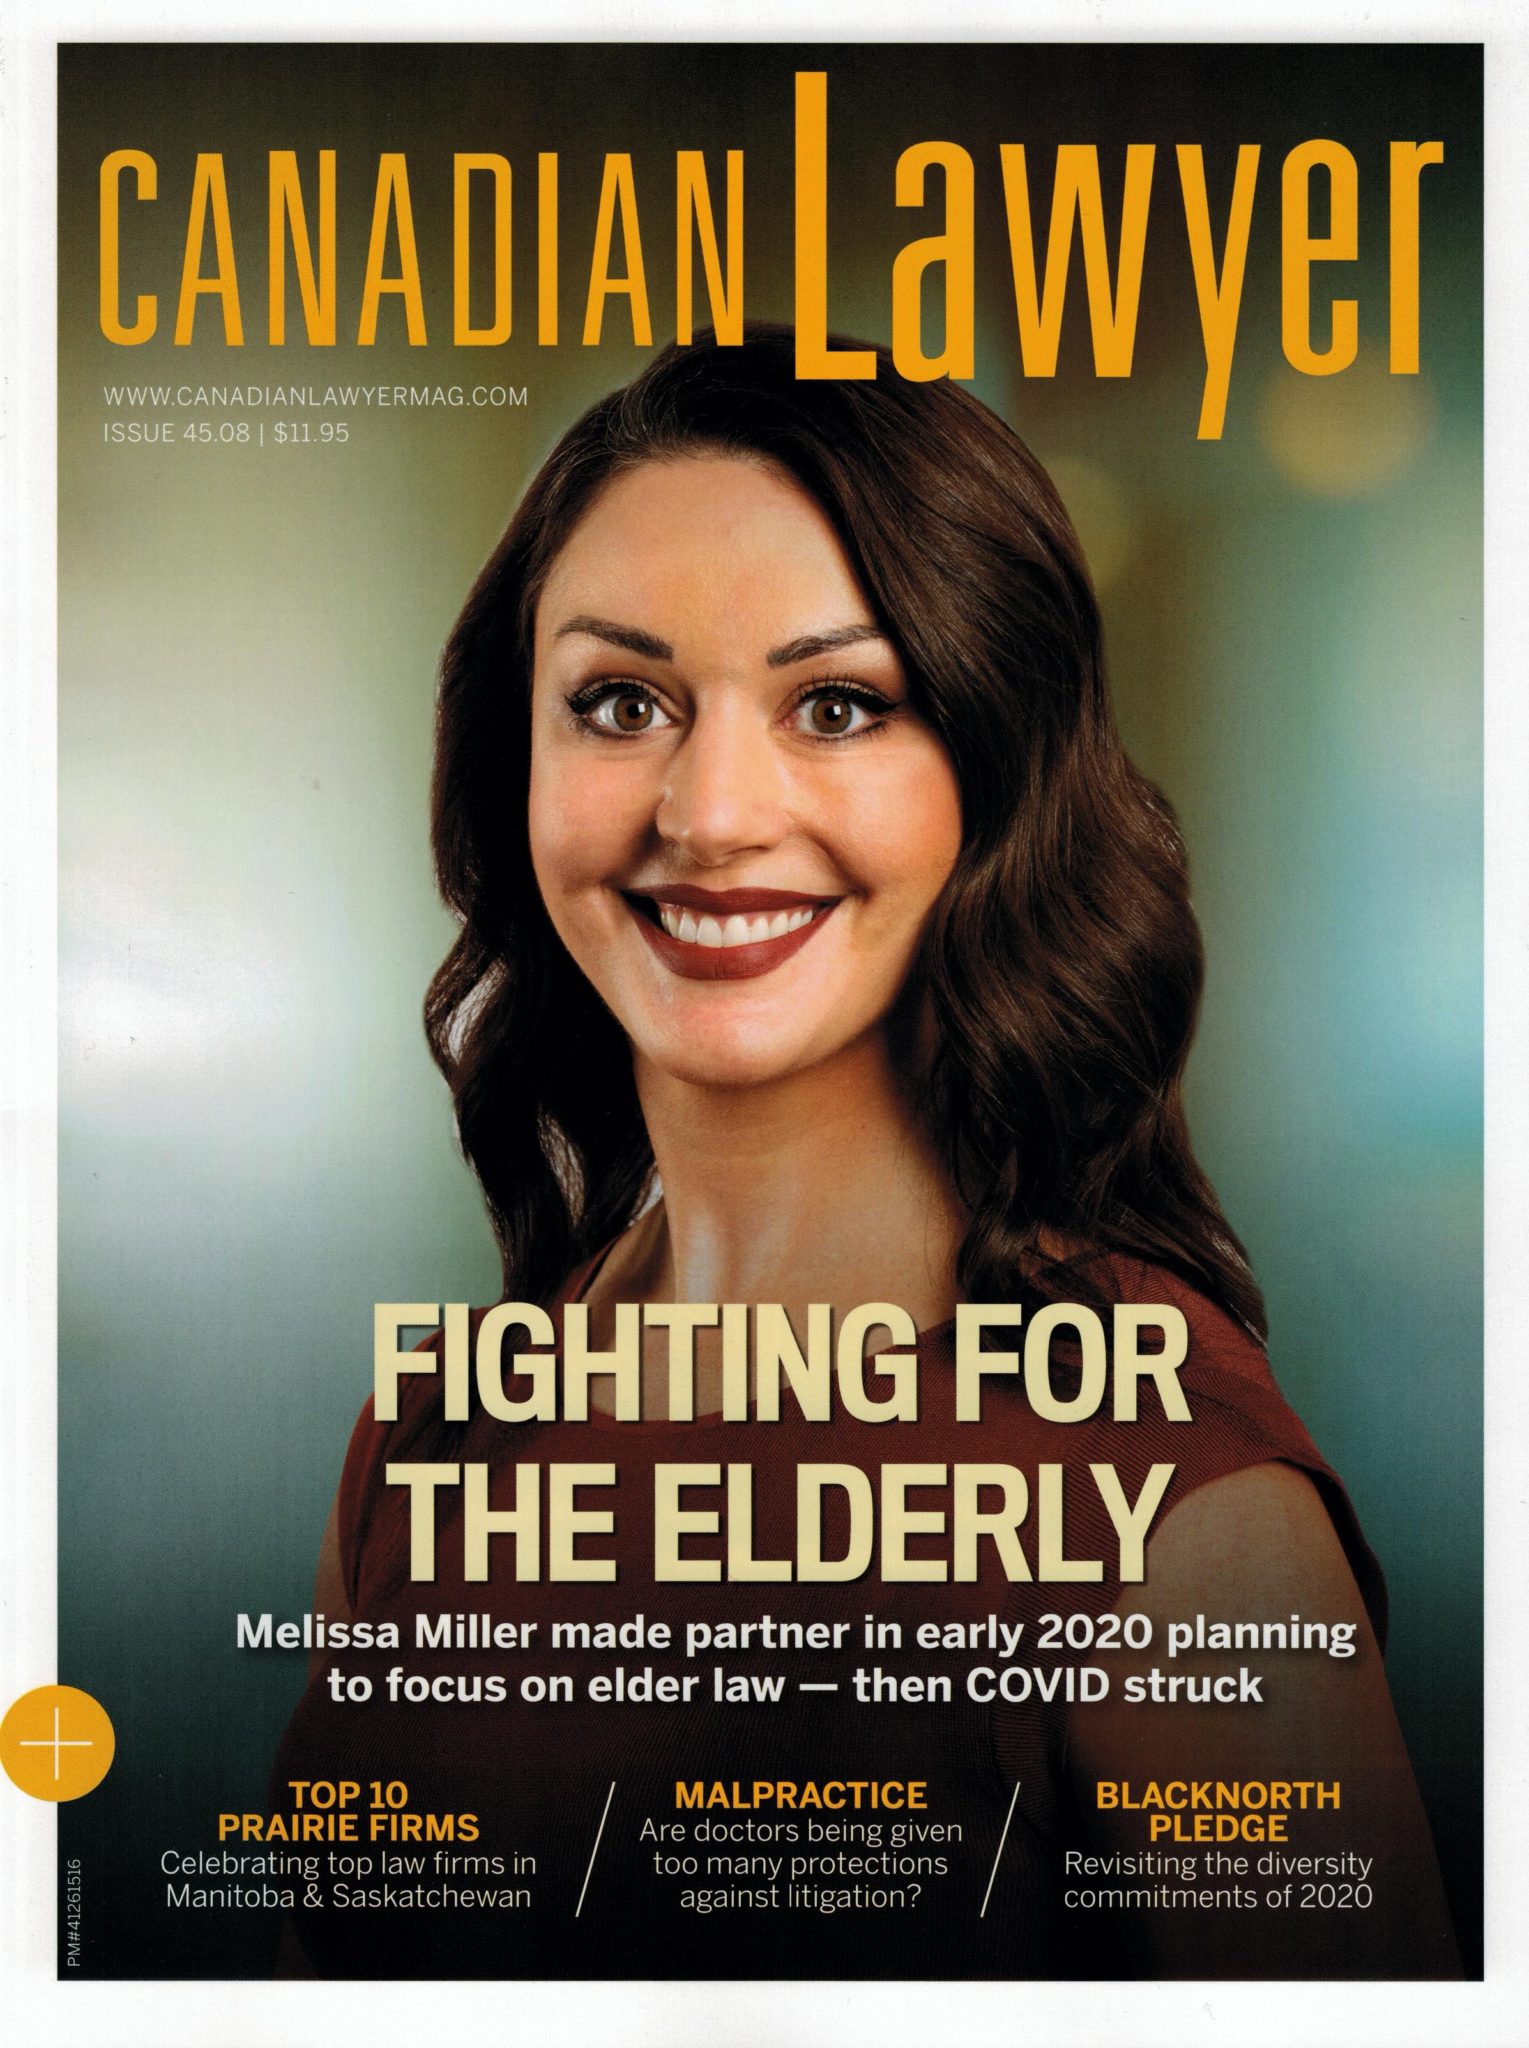 Melissa Miller Featured on the Cover of Canadian Lawyer Magazine